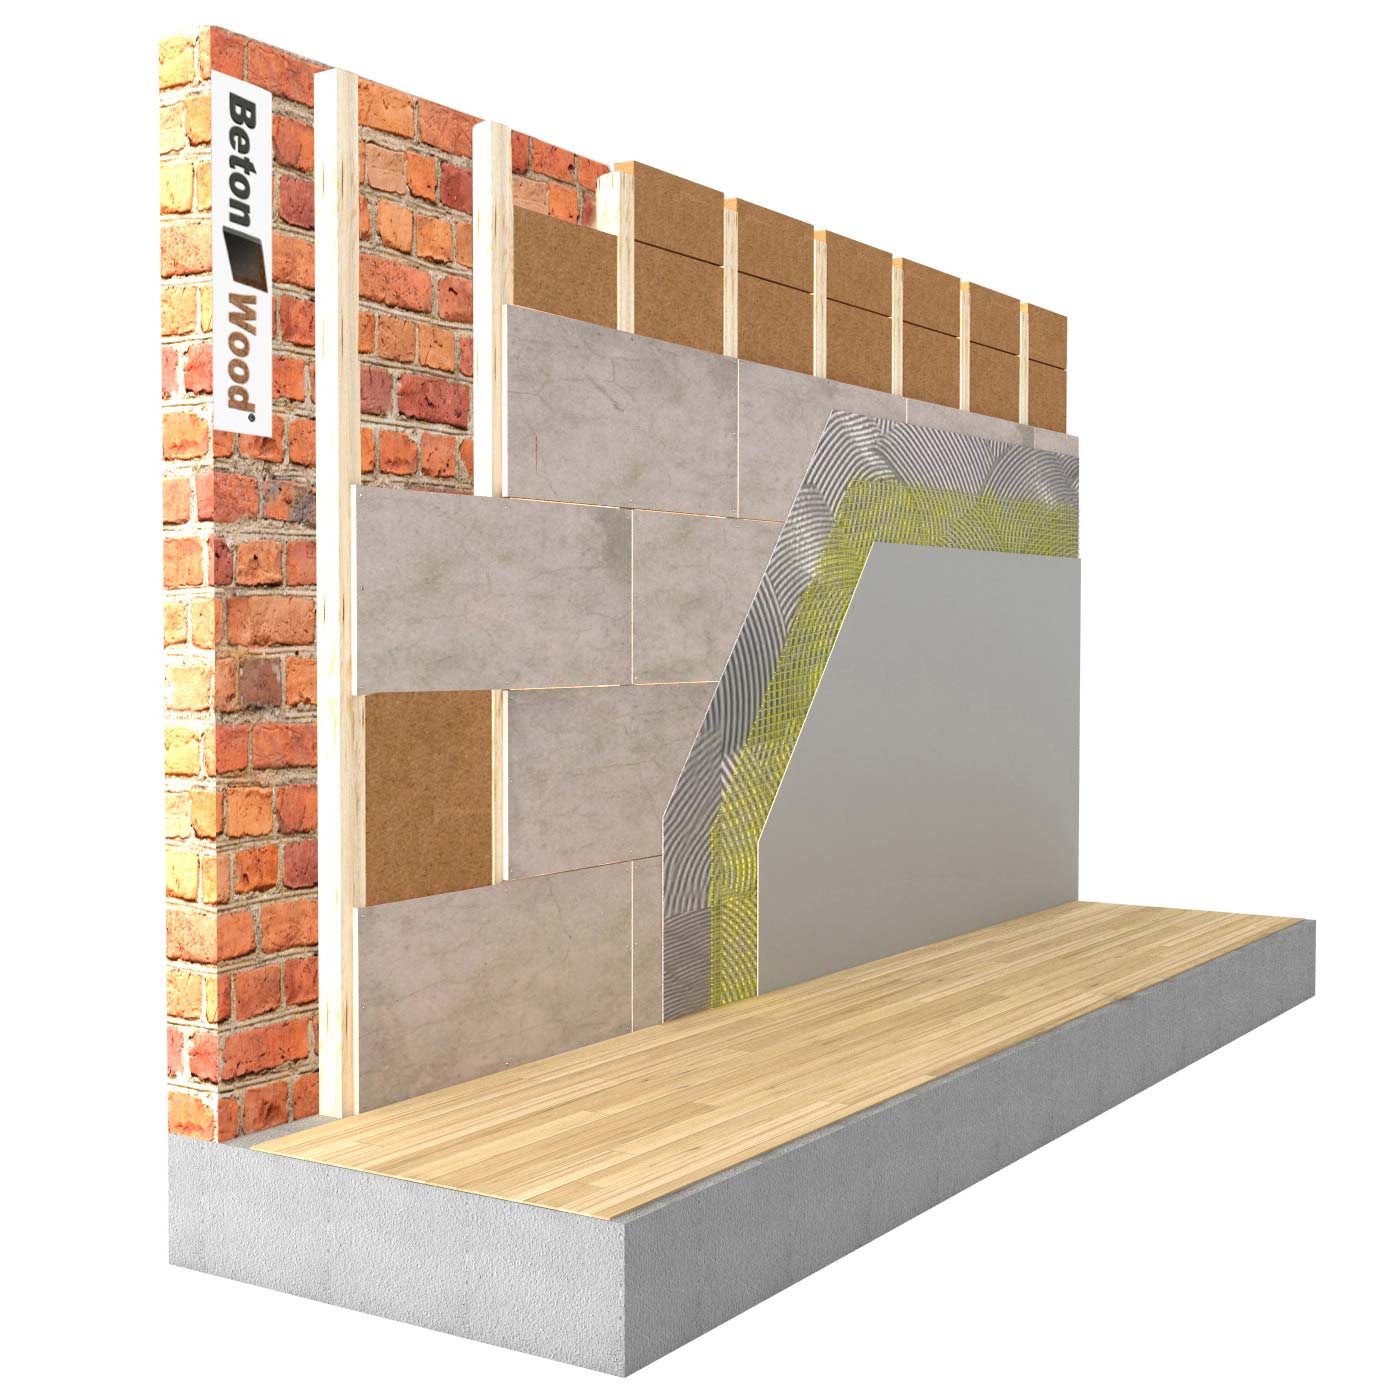 Internal insulation system with Therm fiber wood on masonry